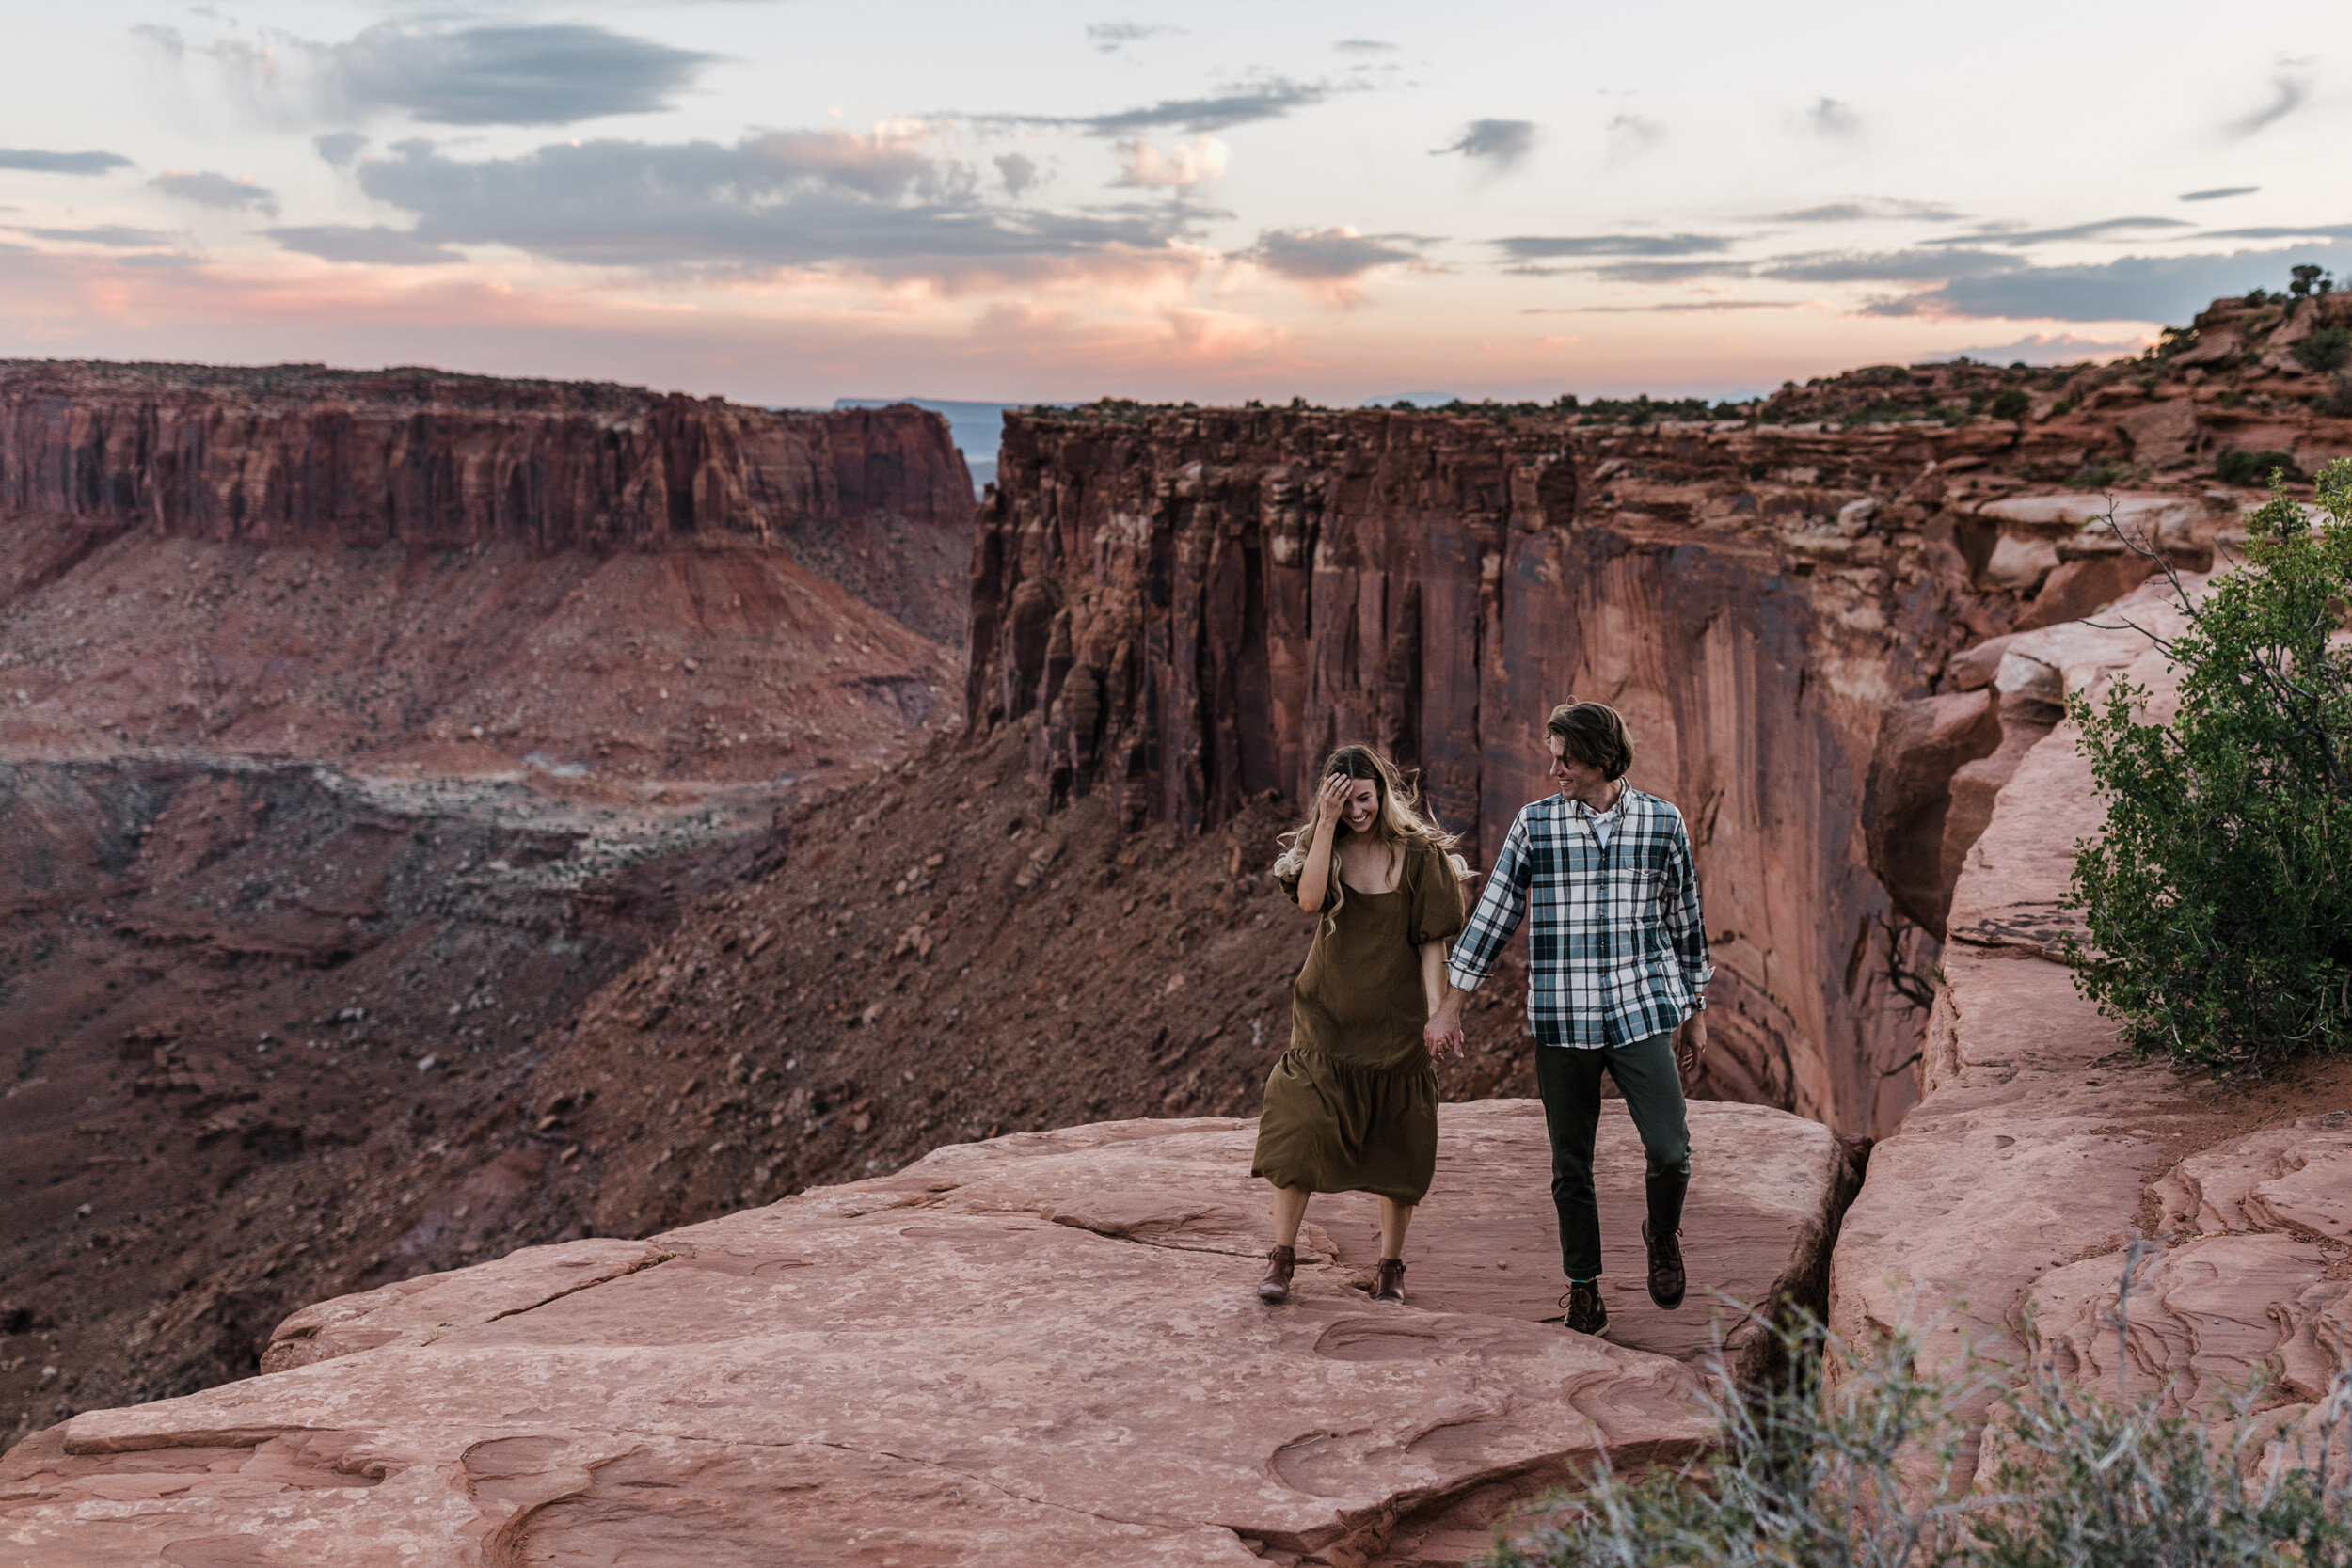 Casual Adventure Anniversary session in Moab, Utah | Sunset in Canyonlands National Park